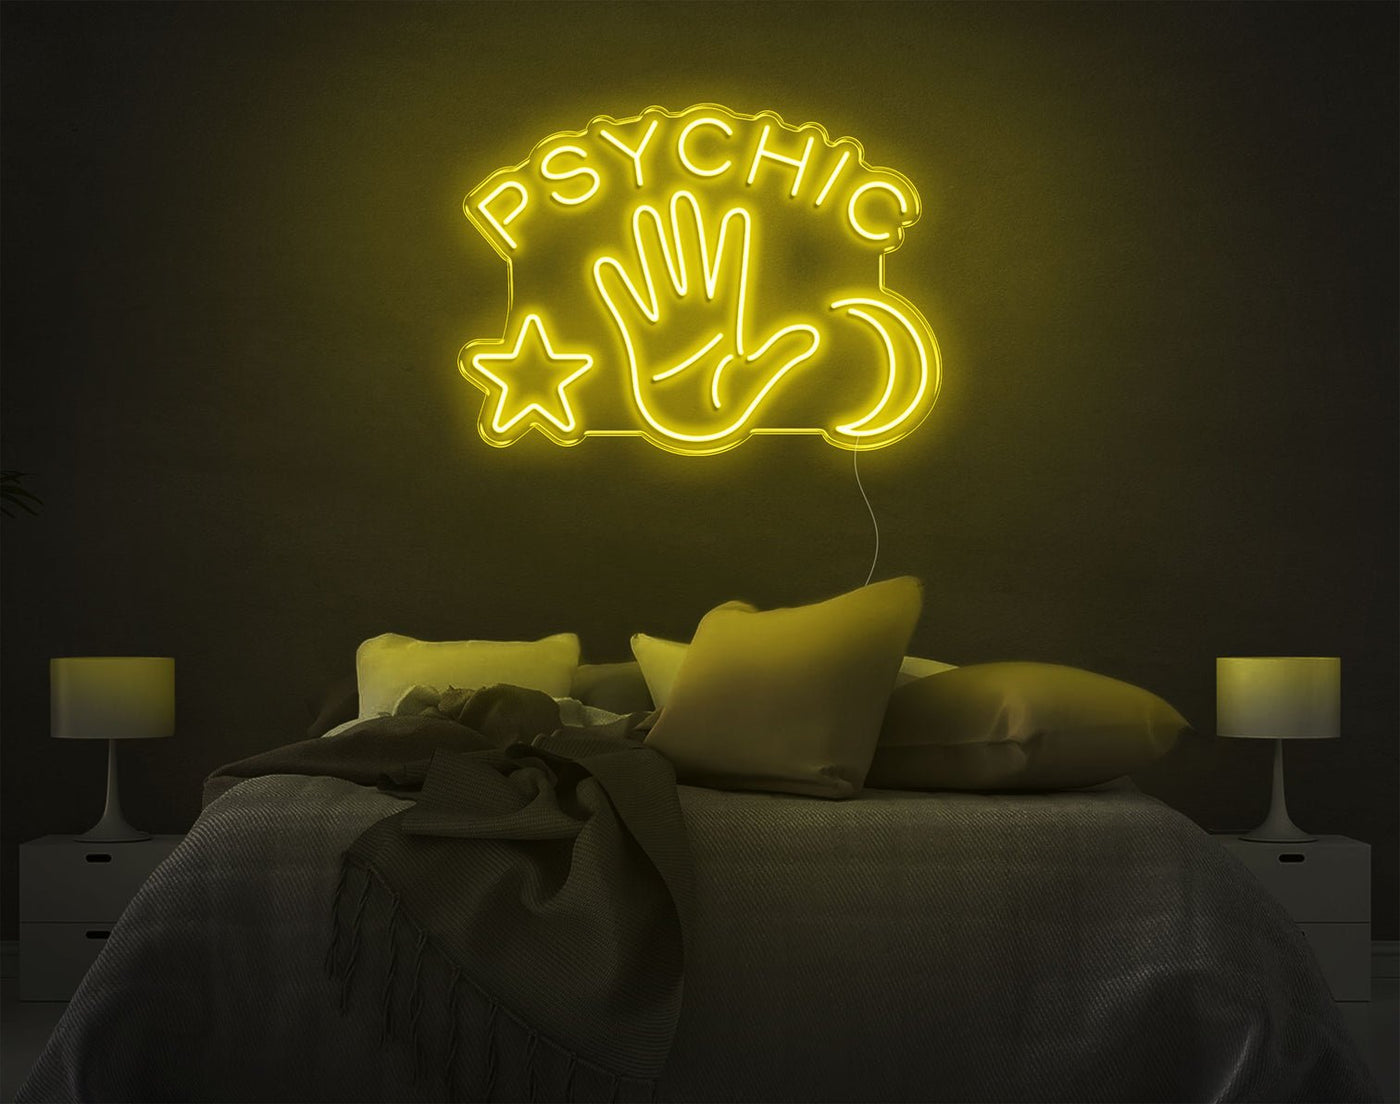 Psychic LED Neon Sign - 20inch x 28inchHot Pink